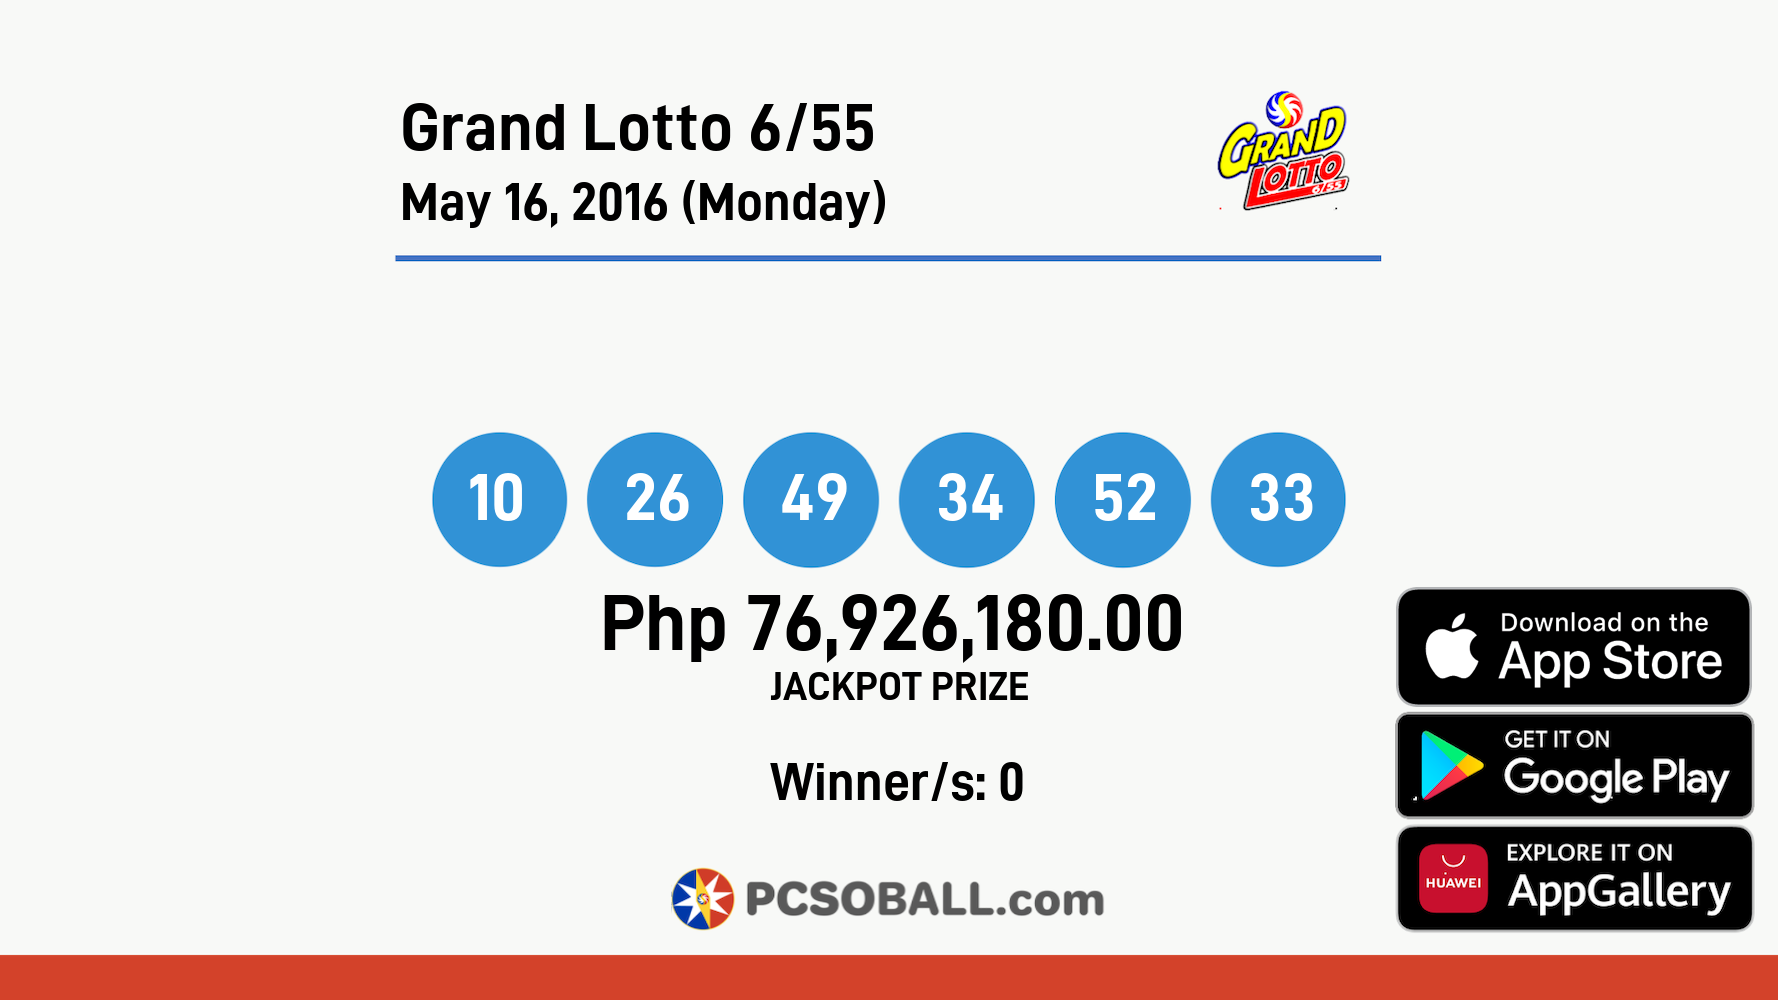 Grand Lotto 6/55 May 16, 2016 (Monday) Result